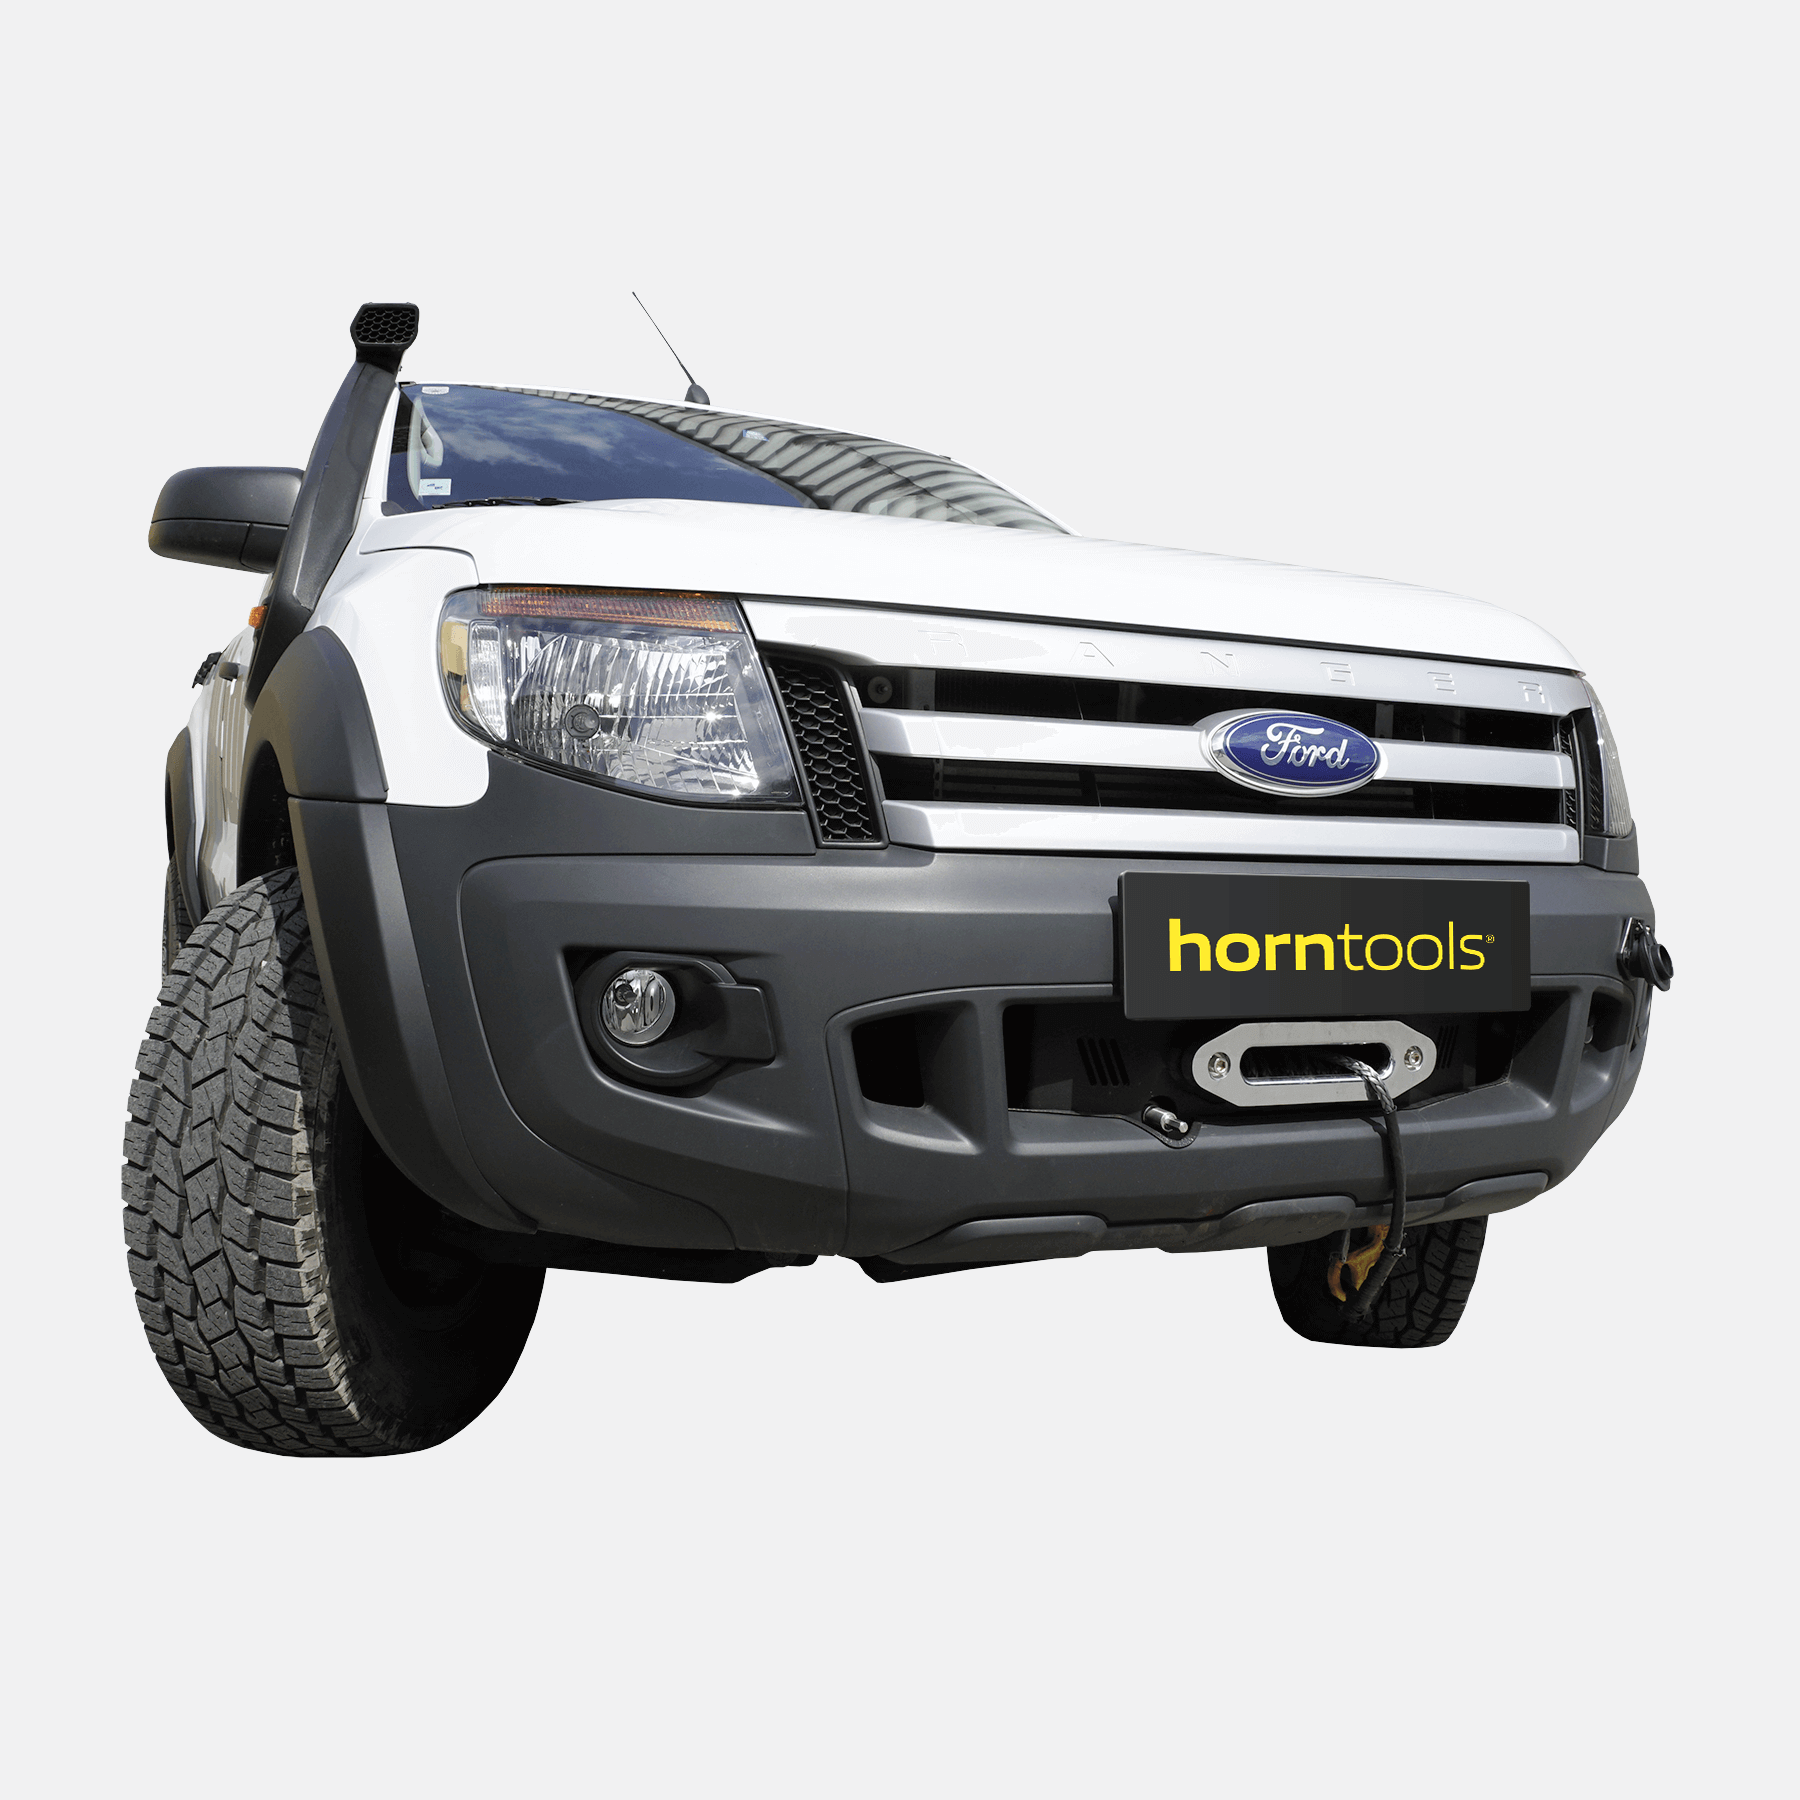 Alpha winch system for Ford Ranger T6 4.3 tons built between 2012 and 2015